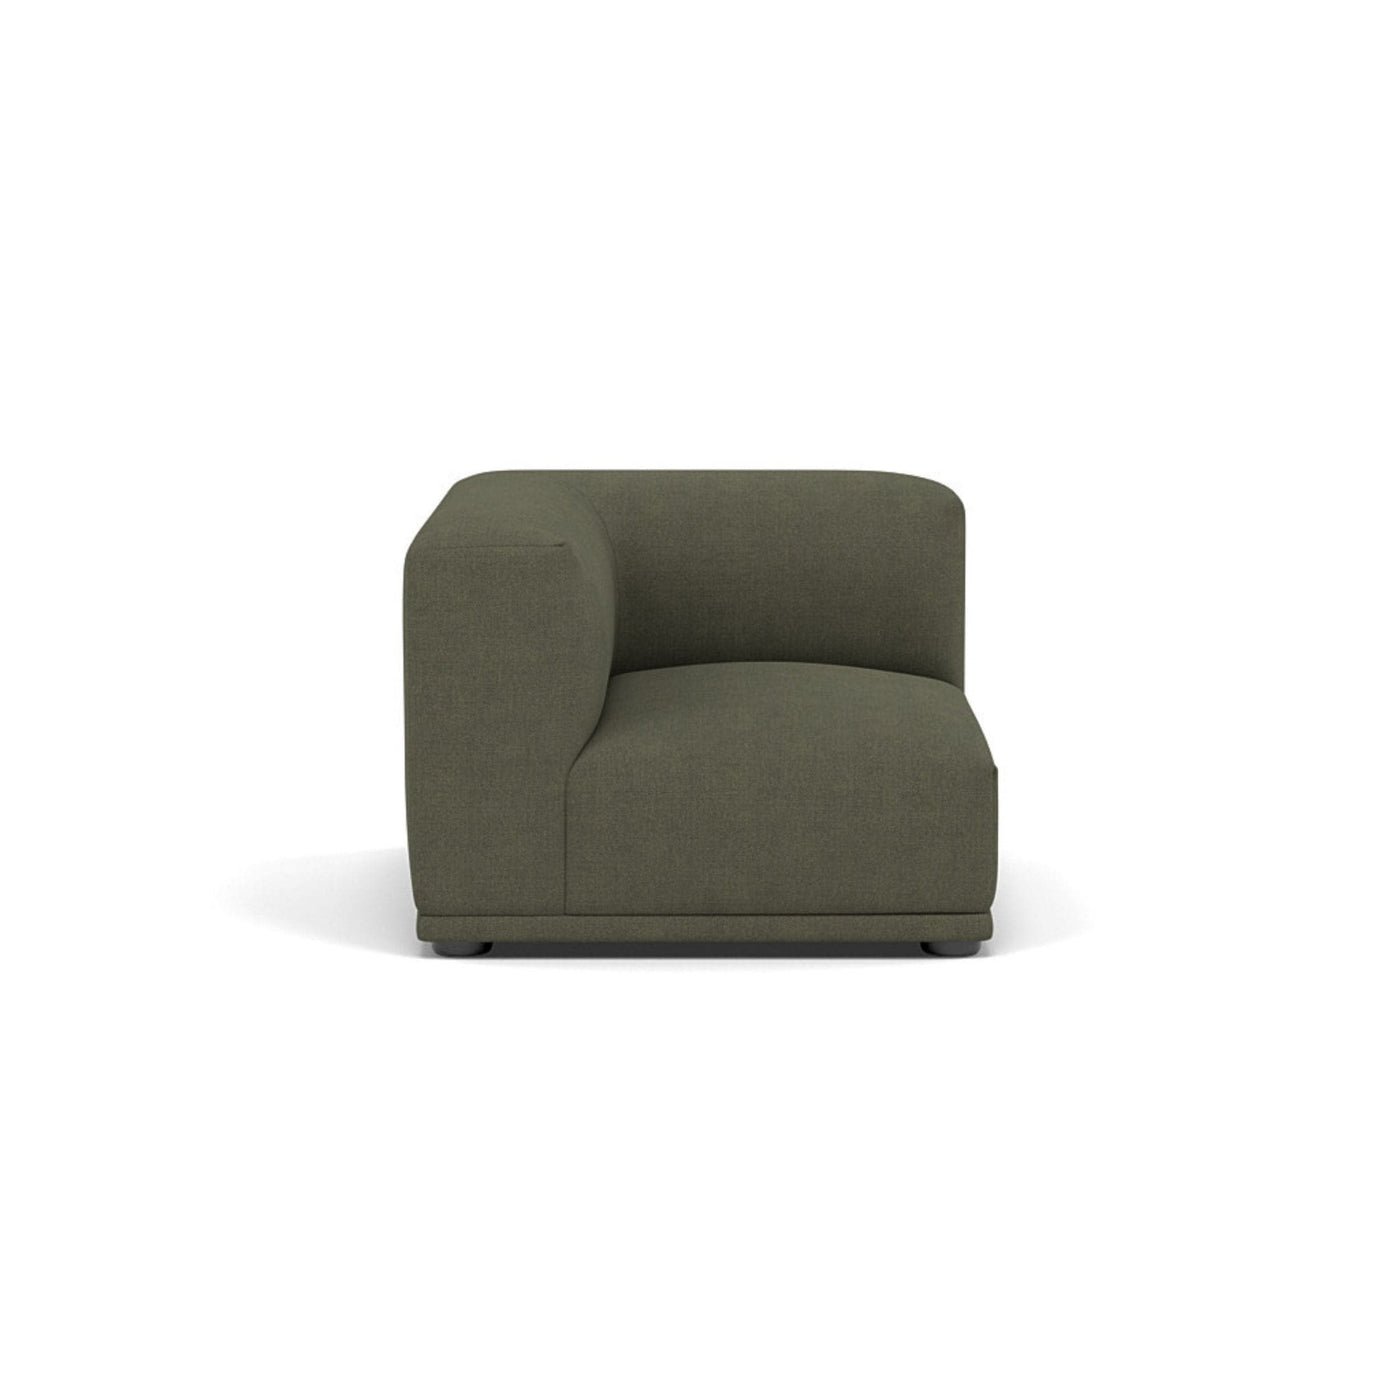 Muuto Connect Modular Sofa System, module e, corner, fiord 961 fabric. Available from someday designs. #colour_fiord-961